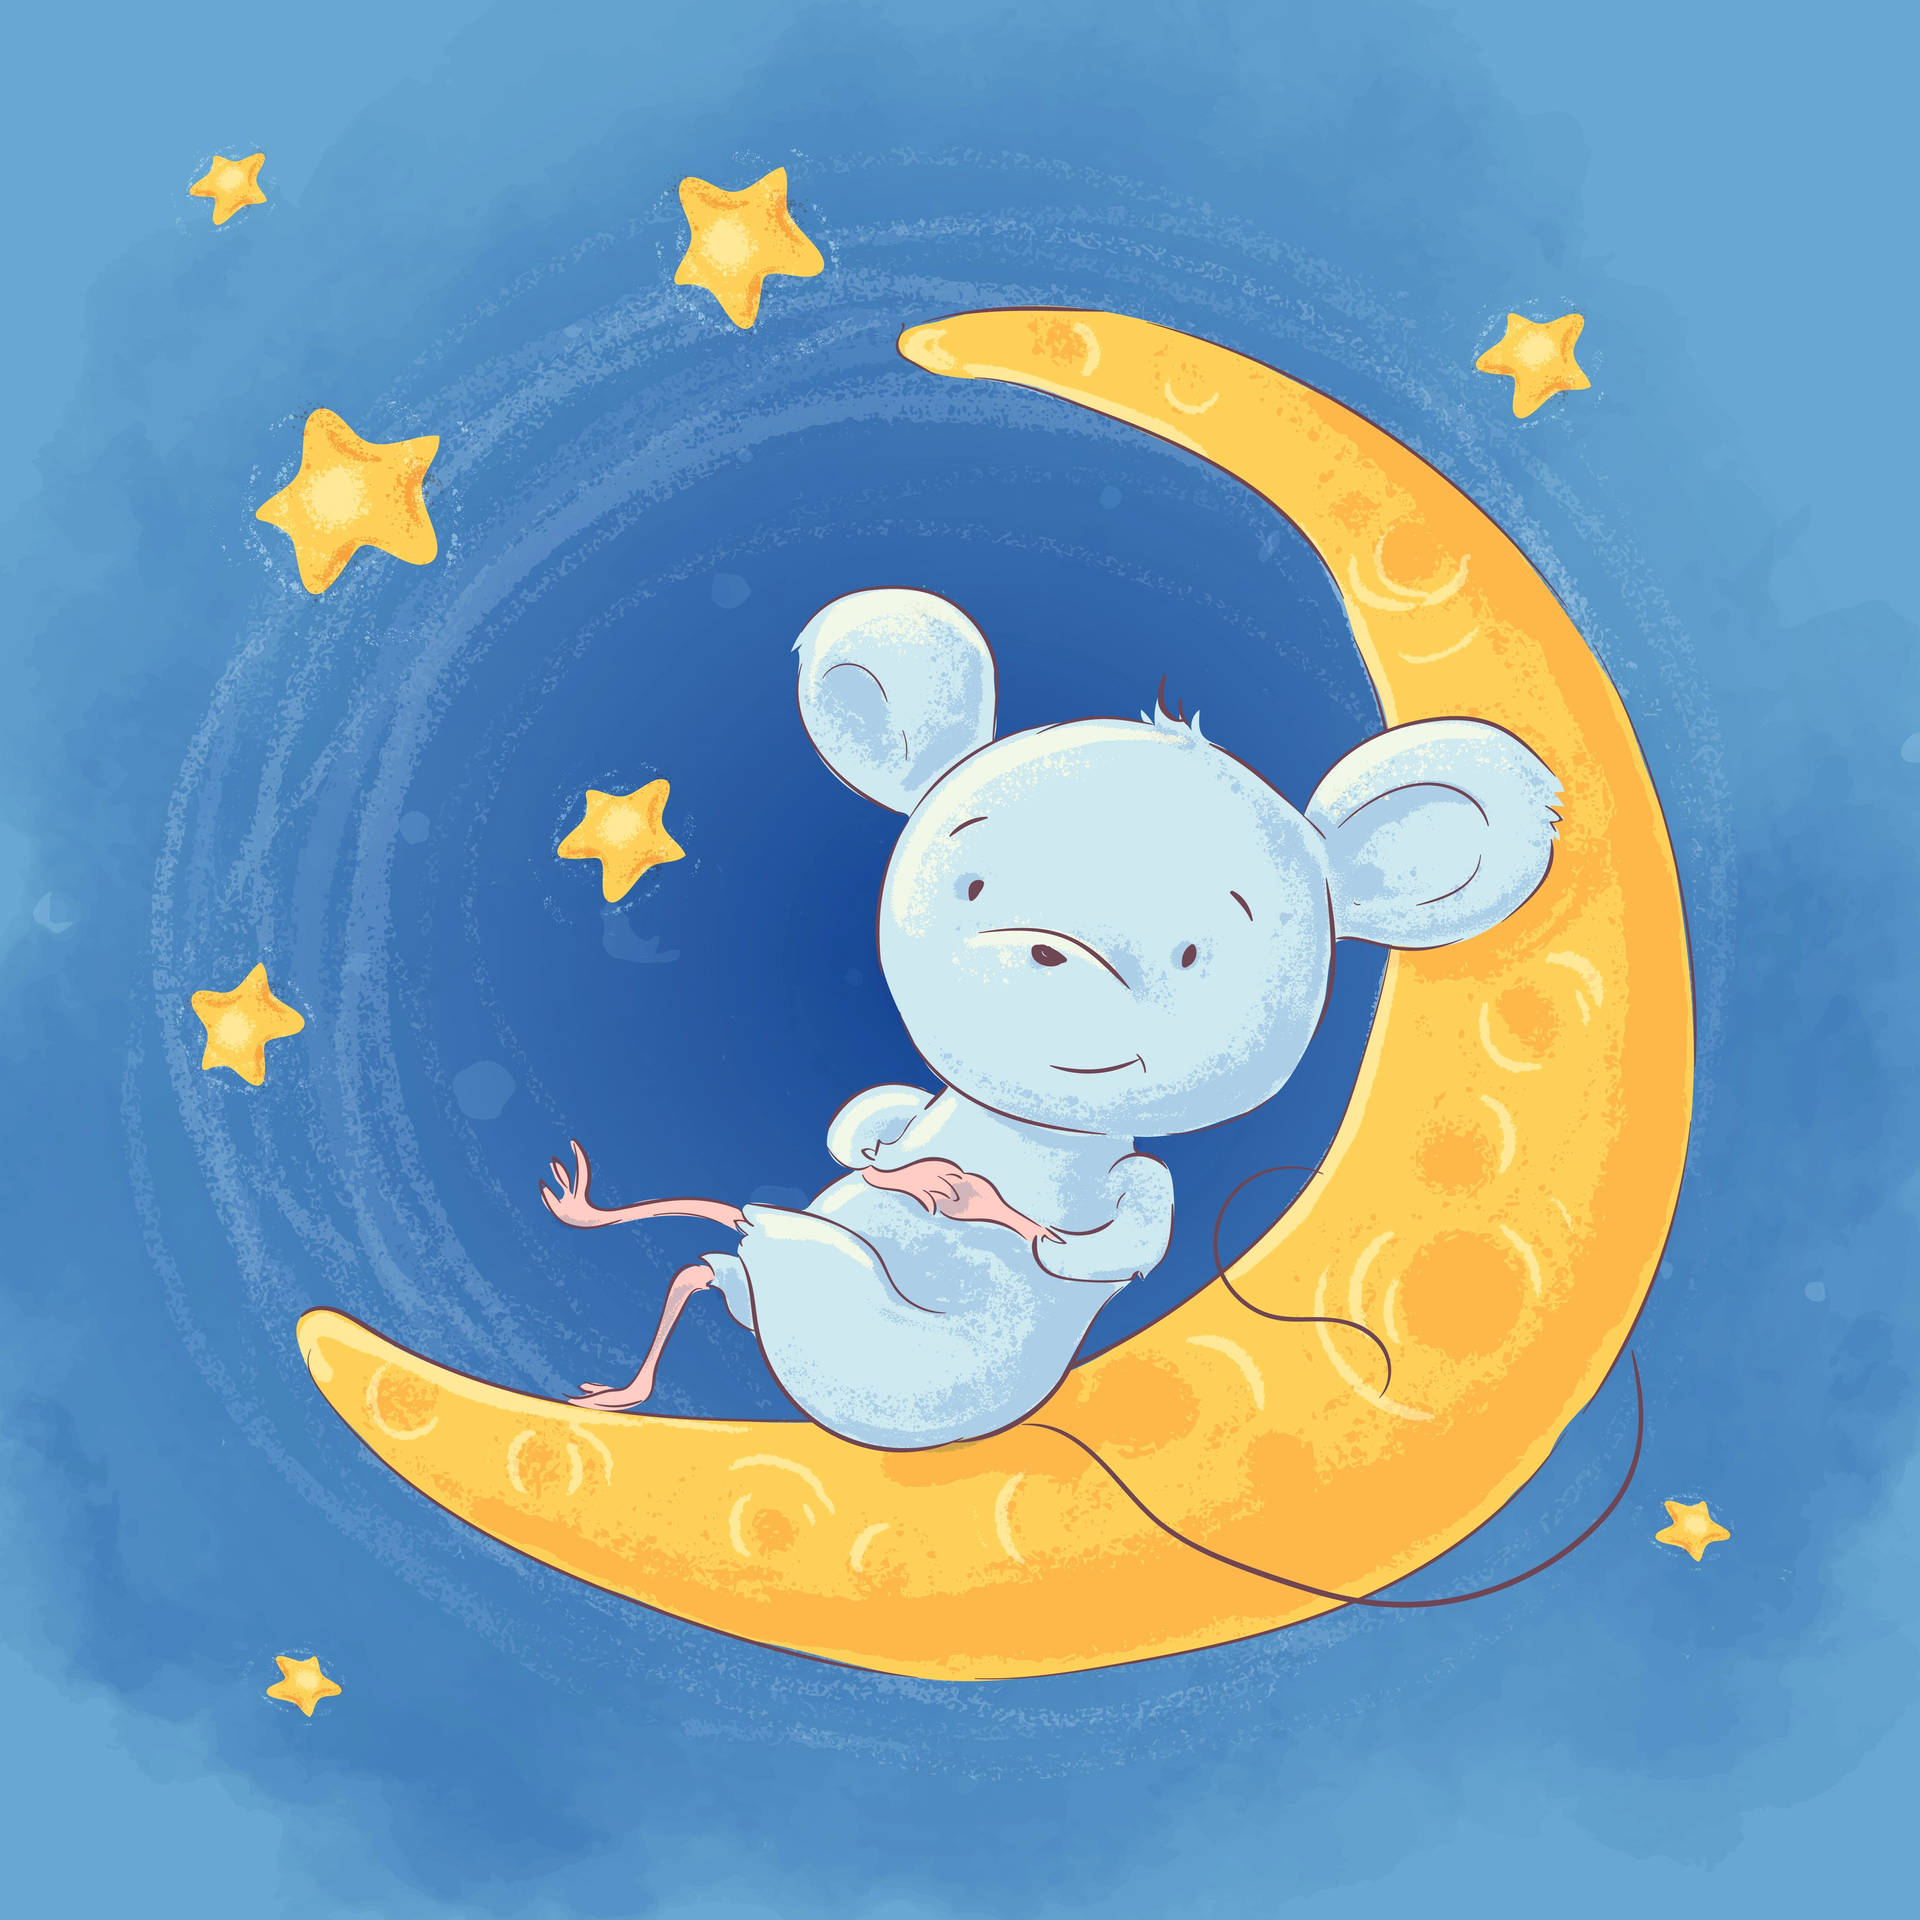 Mouse On Moon And Stars Art Wallpaper